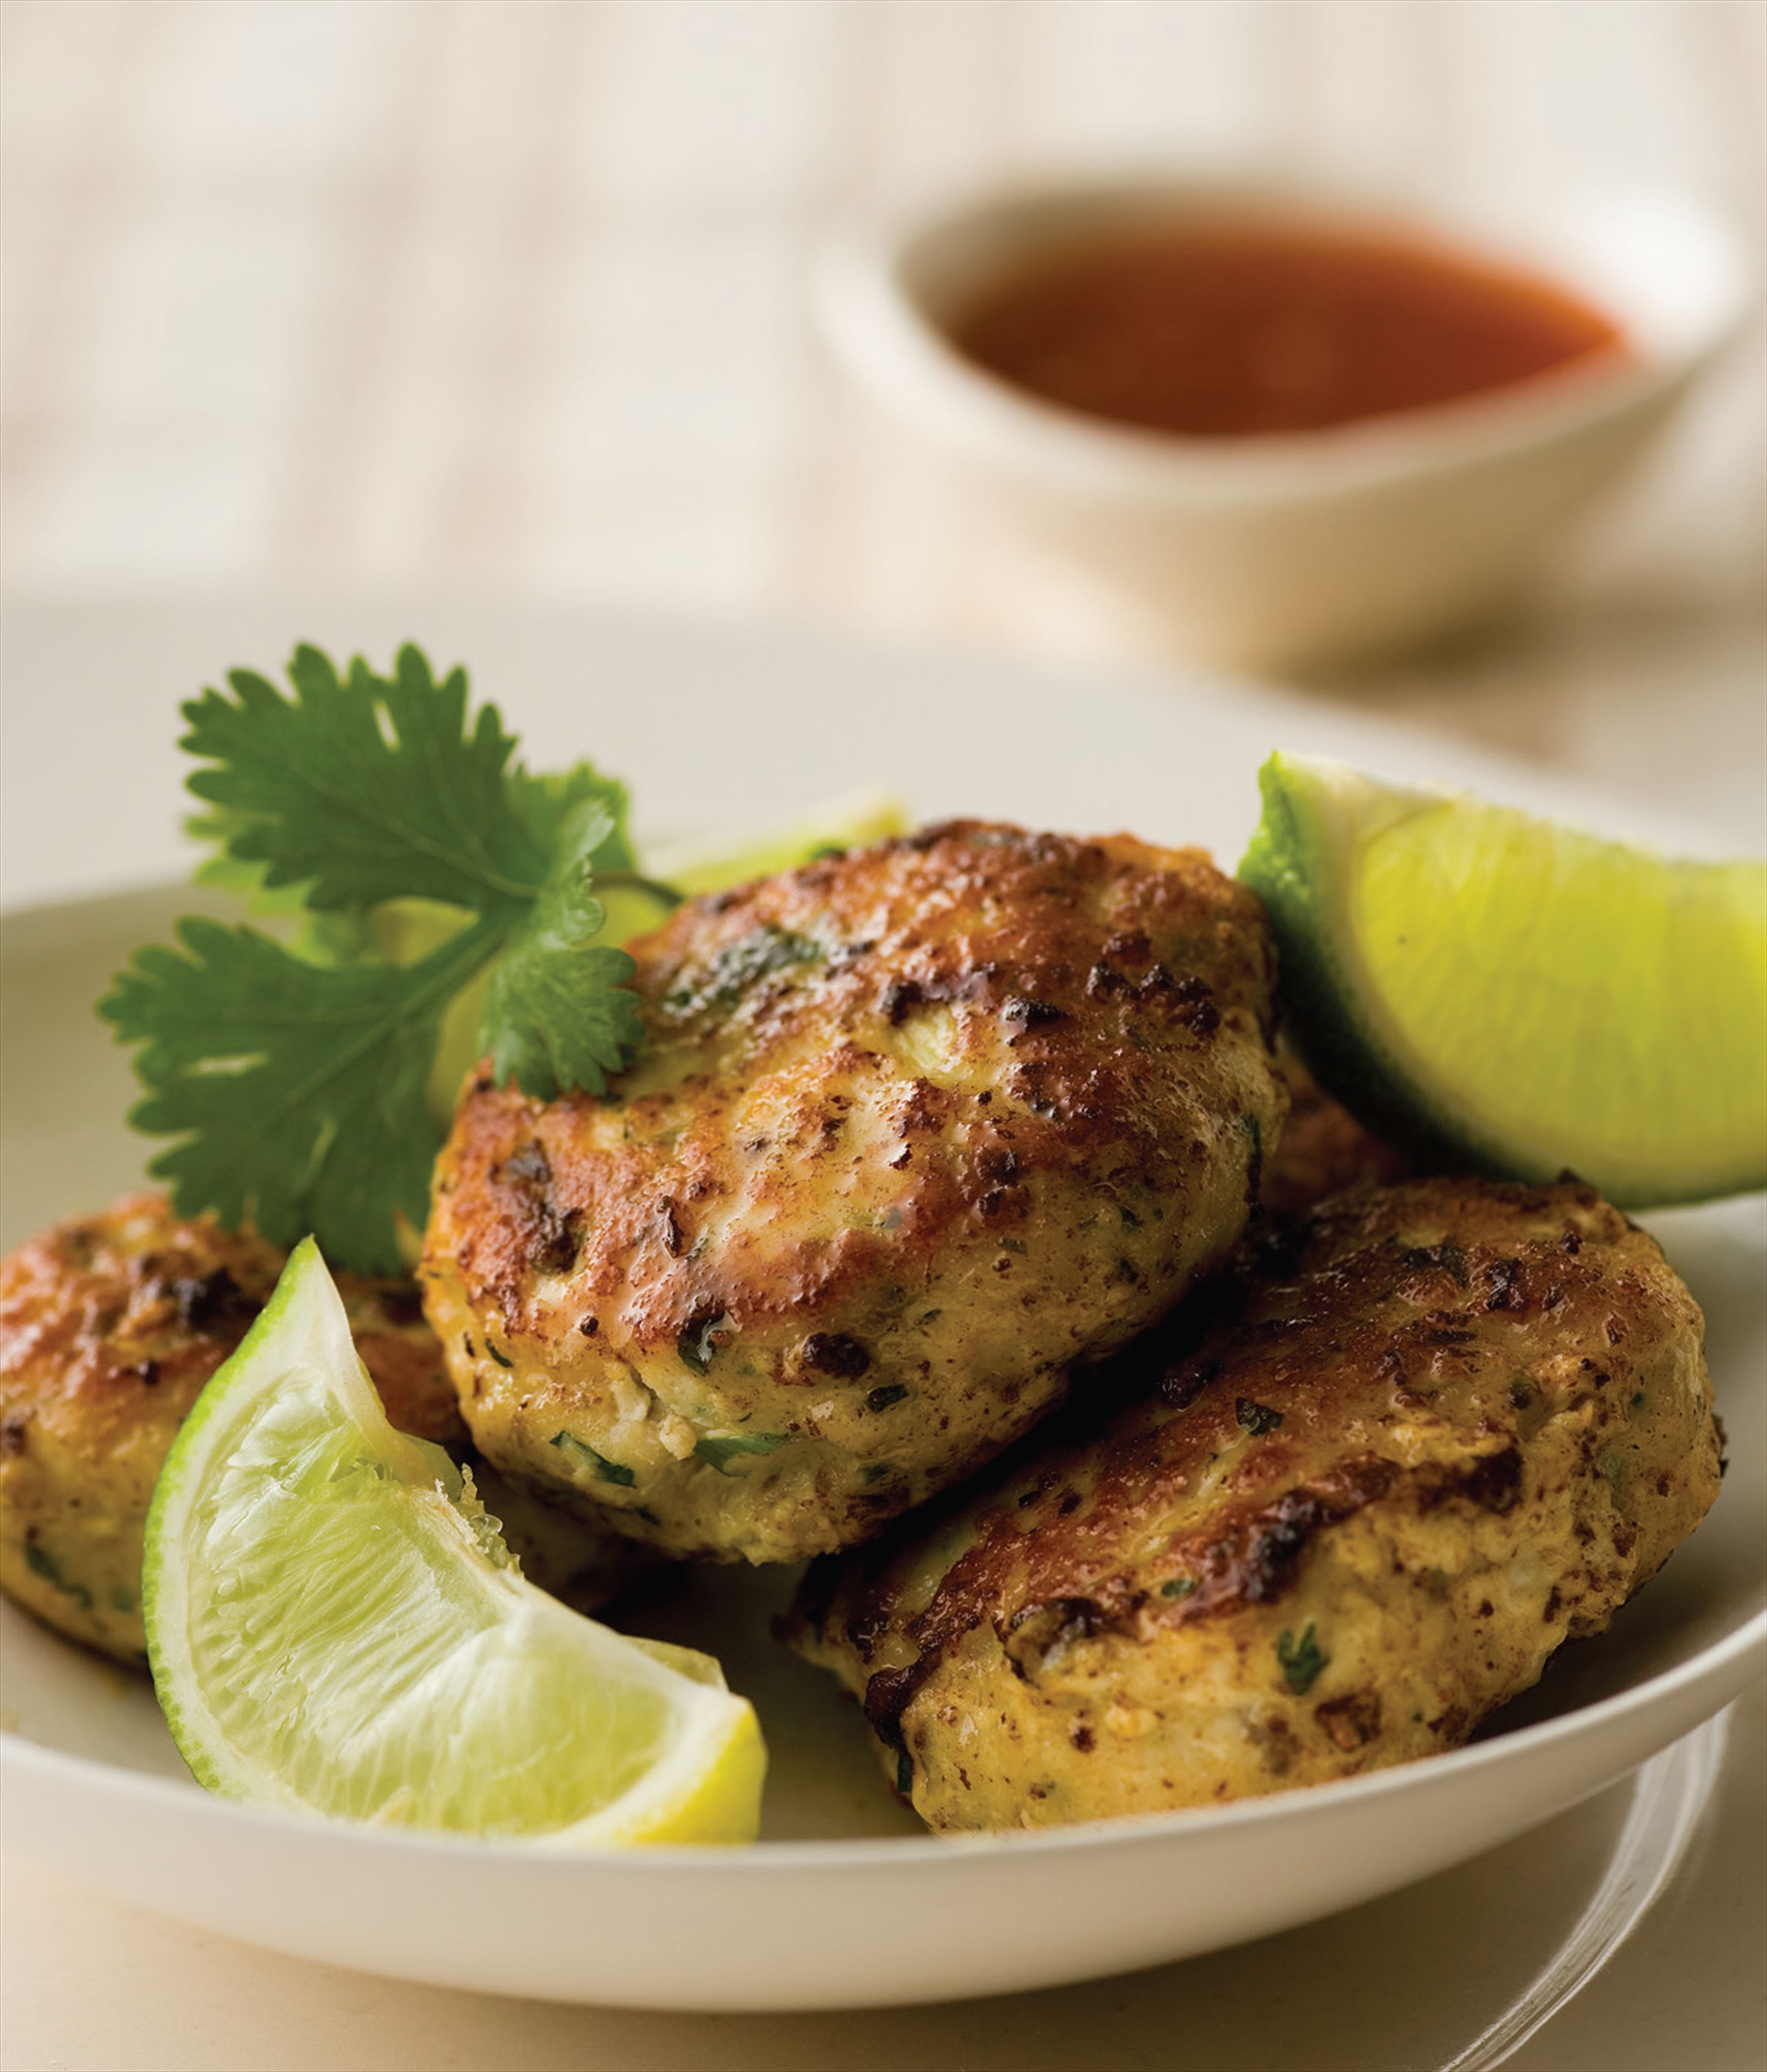 Fragrant Thai fish cakes and a green salad